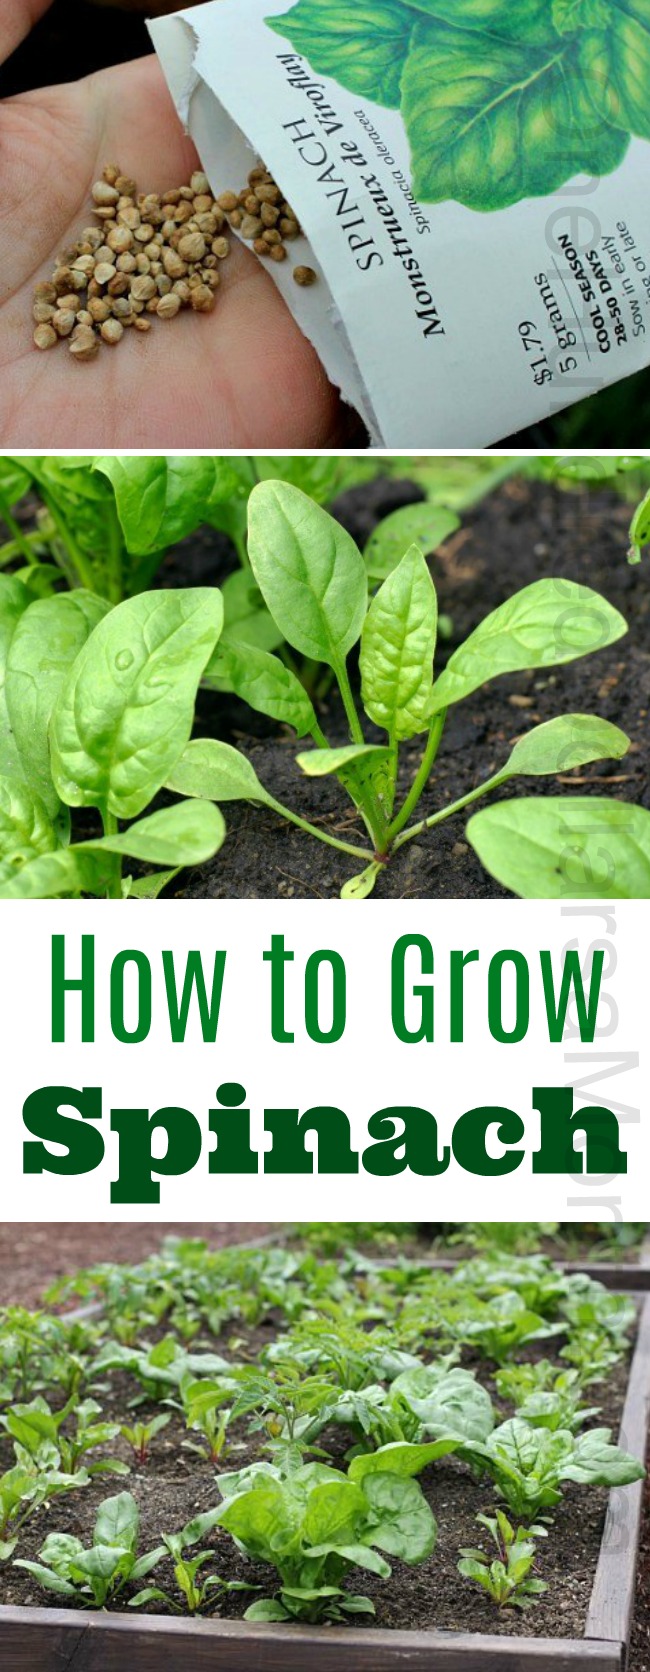 How to Grow Spinach {Start to Finish}